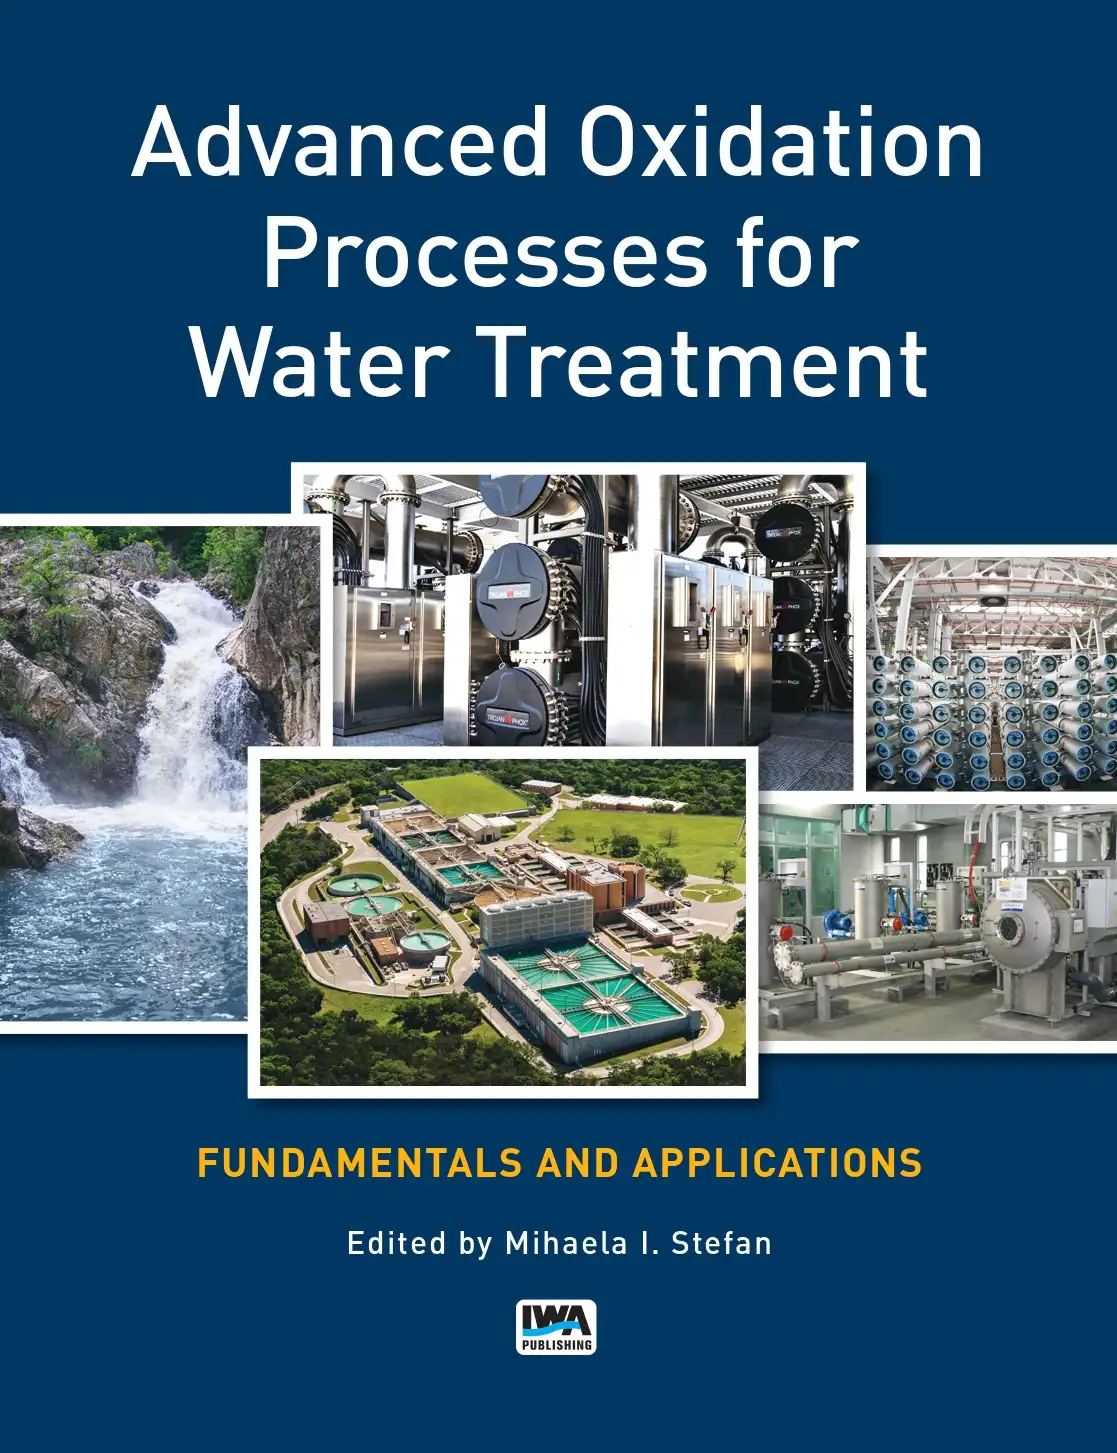 Advanced Oxidation Processes for Water Treatment